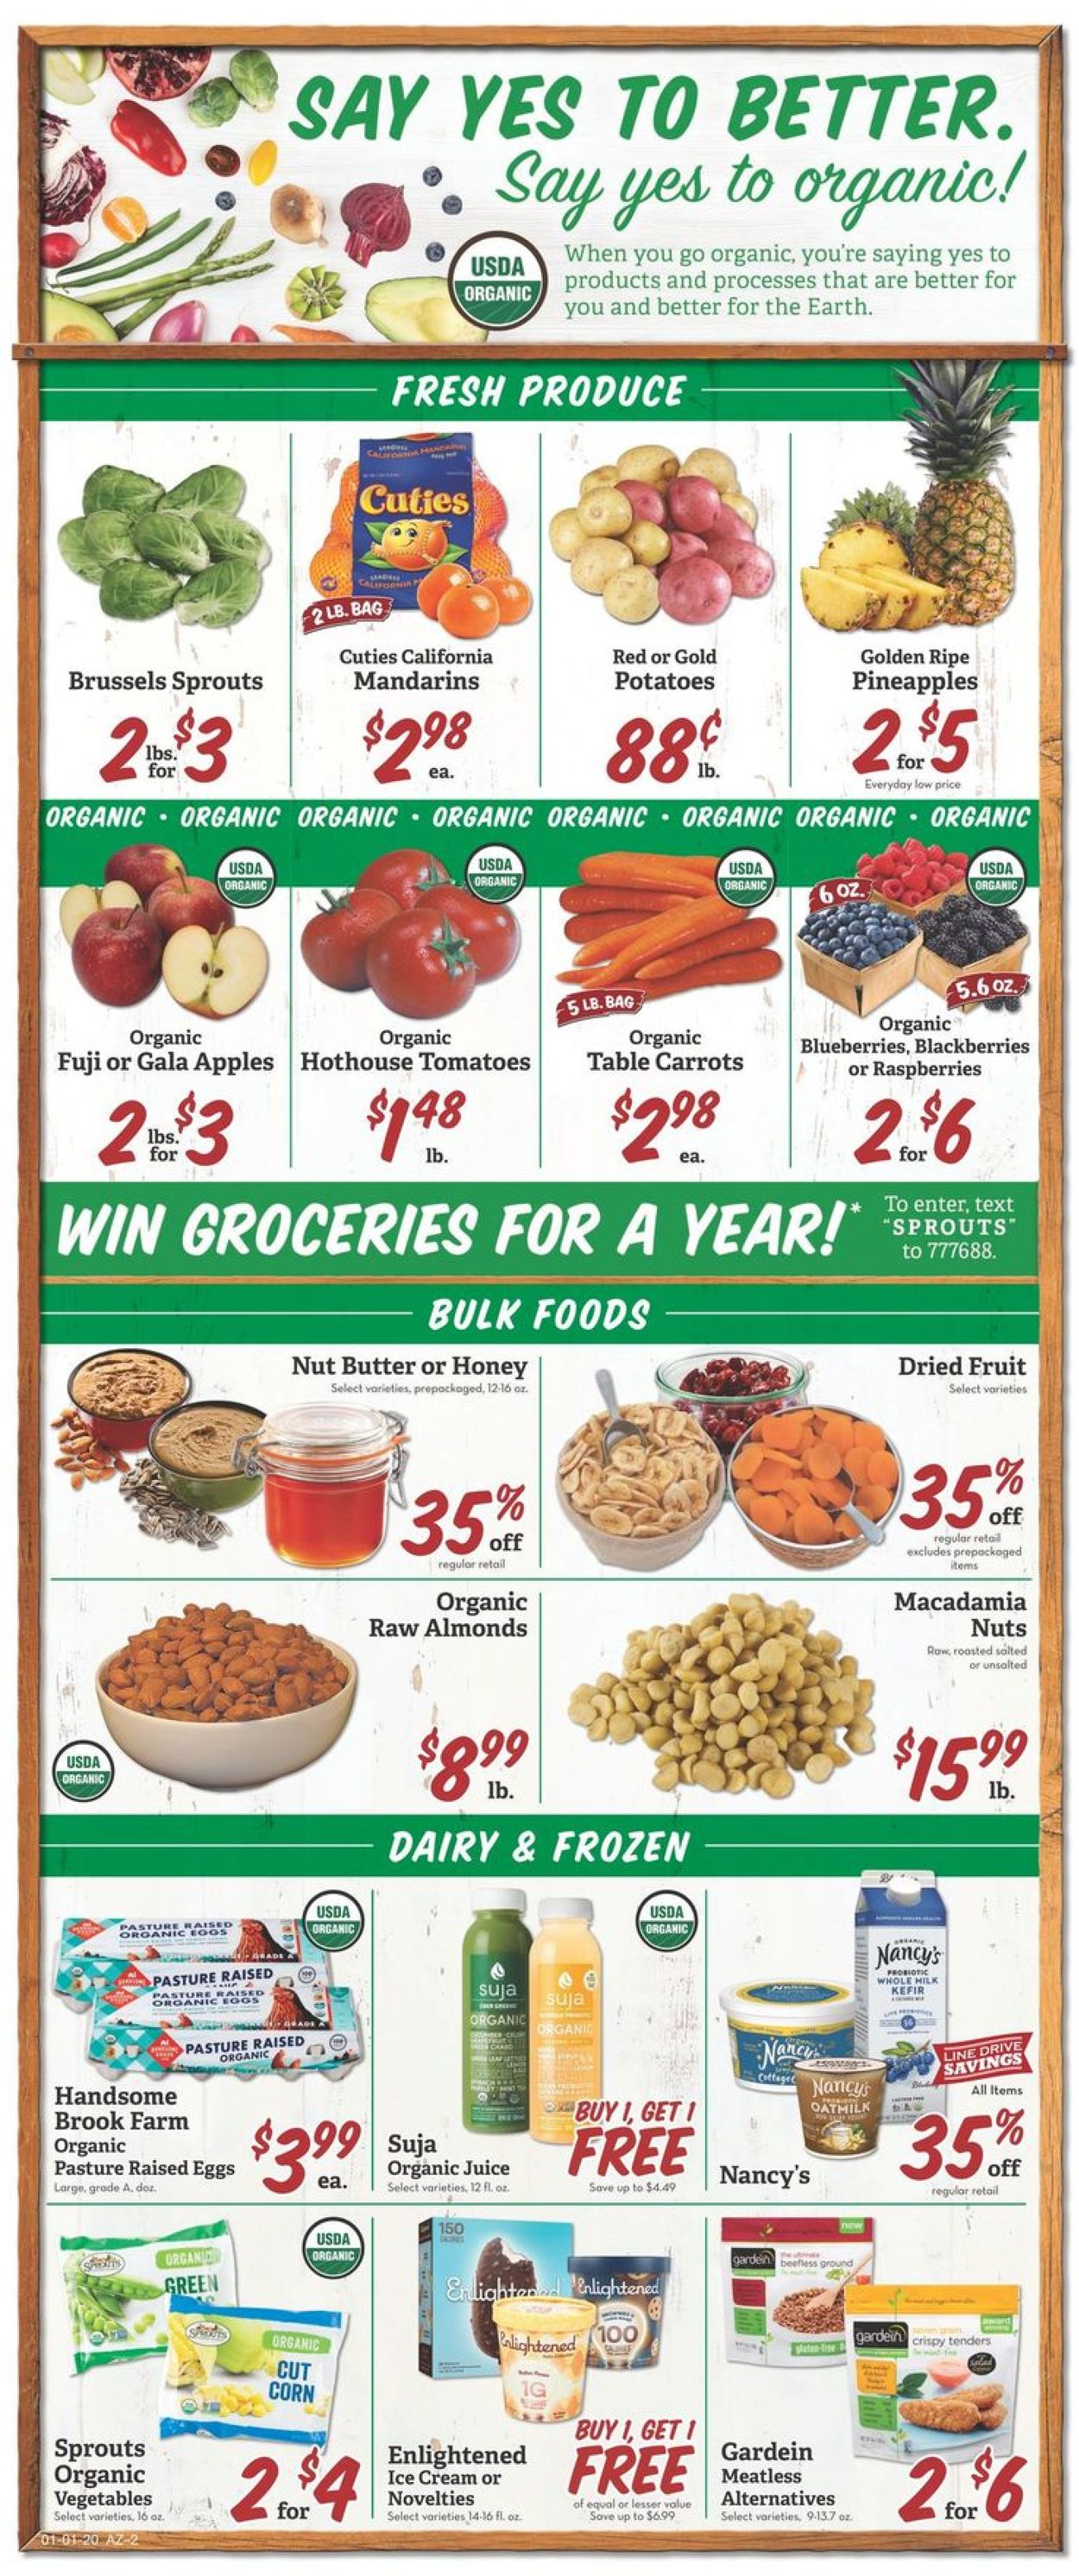 Sprouts Ad from 01/01/2020